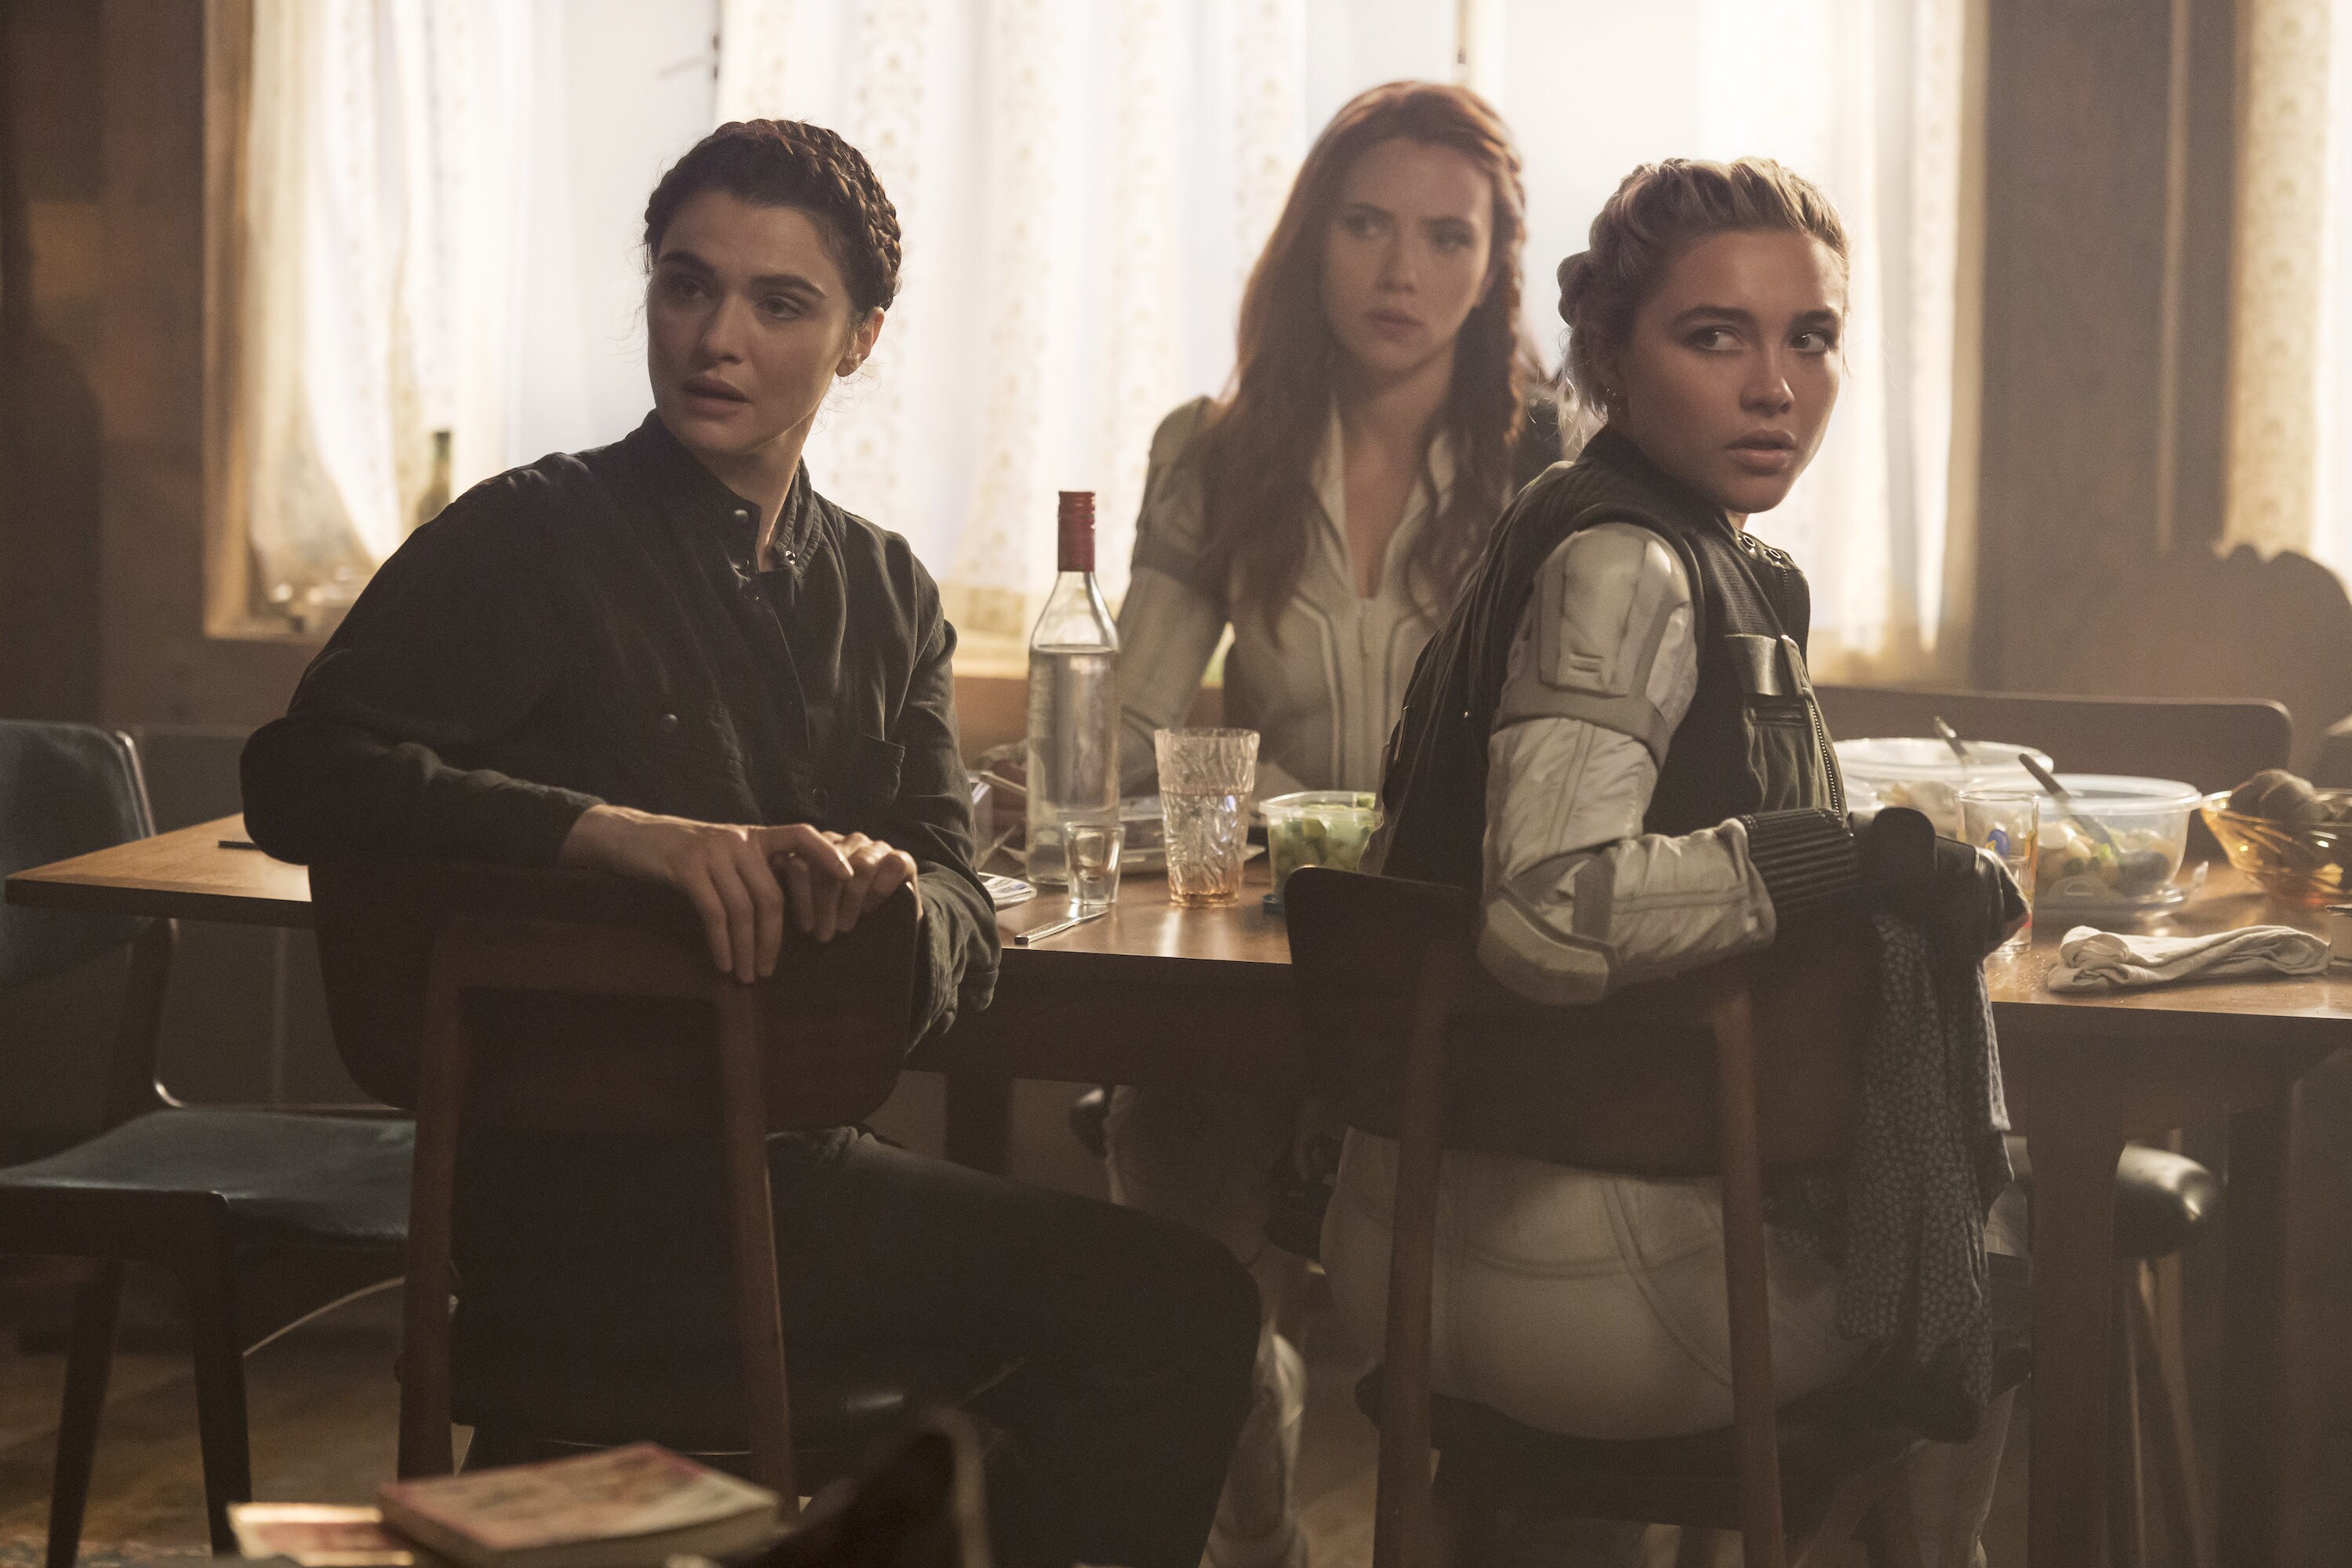 (L-R): Melina (Rachel Weisz), Black Widow/Natasha Romanoff (Scarlett Johansson) and Yelena (Florence Pugh) in Marvel Studios' BLACK WIDOW, in theaters and on Disney+ with Premier Access. Photo by Jay Maidment. ©Marvel Studios 2021. All Rights Reserved.